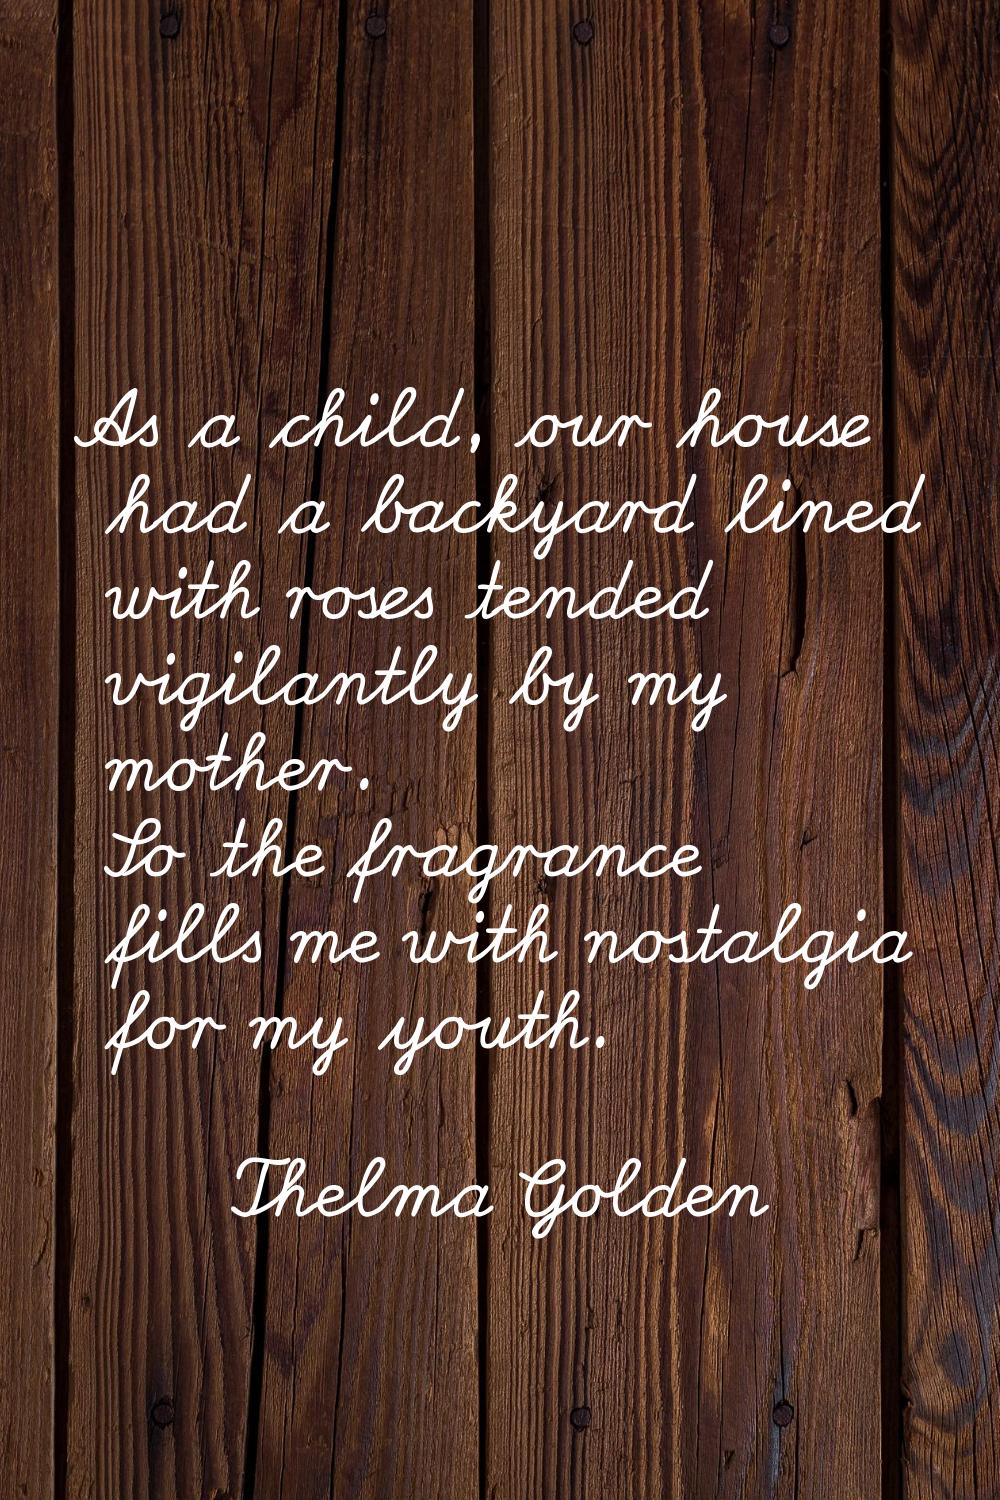 As a child, our house had a backyard lined with roses tended vigilantly by my mother. So the fragra